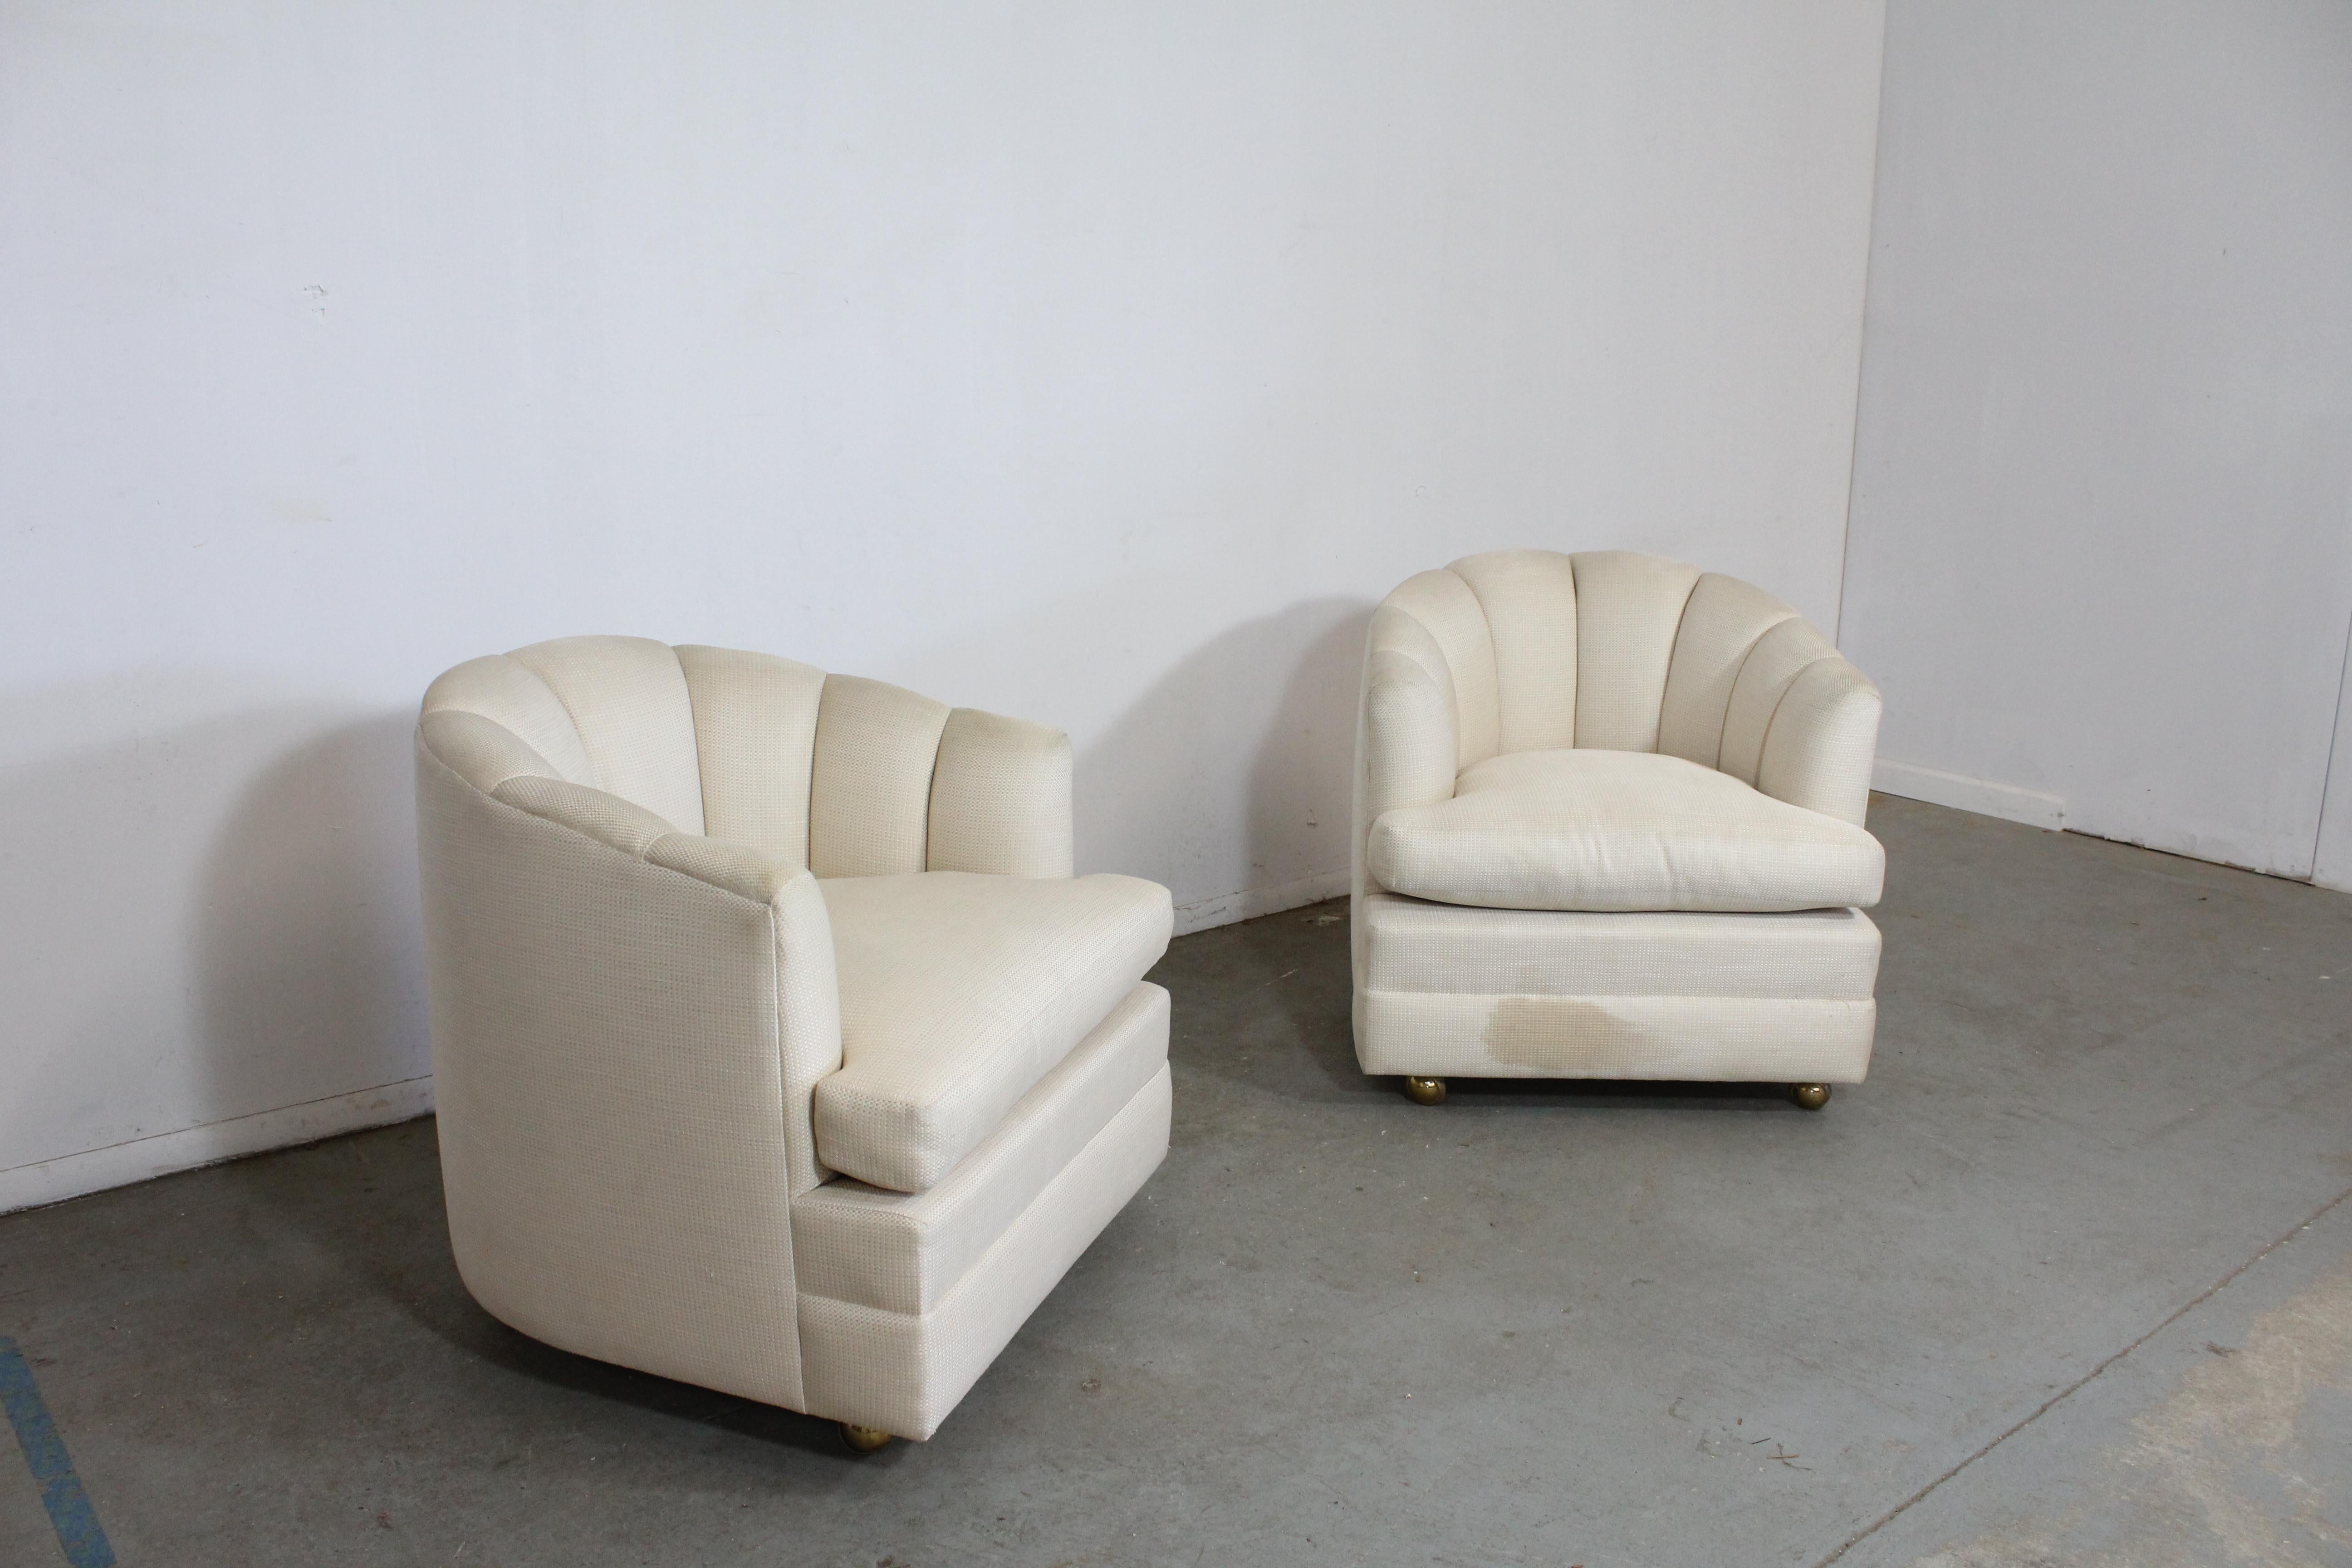 Pair of Mid-Century Modern barrel back club chairs

Offered is a pair of vintage Mid-Century Modern style chairs. These chairs have round backs. We're unsure of their exact age, but we estimate mid-late 20th century. They are in decent condition,